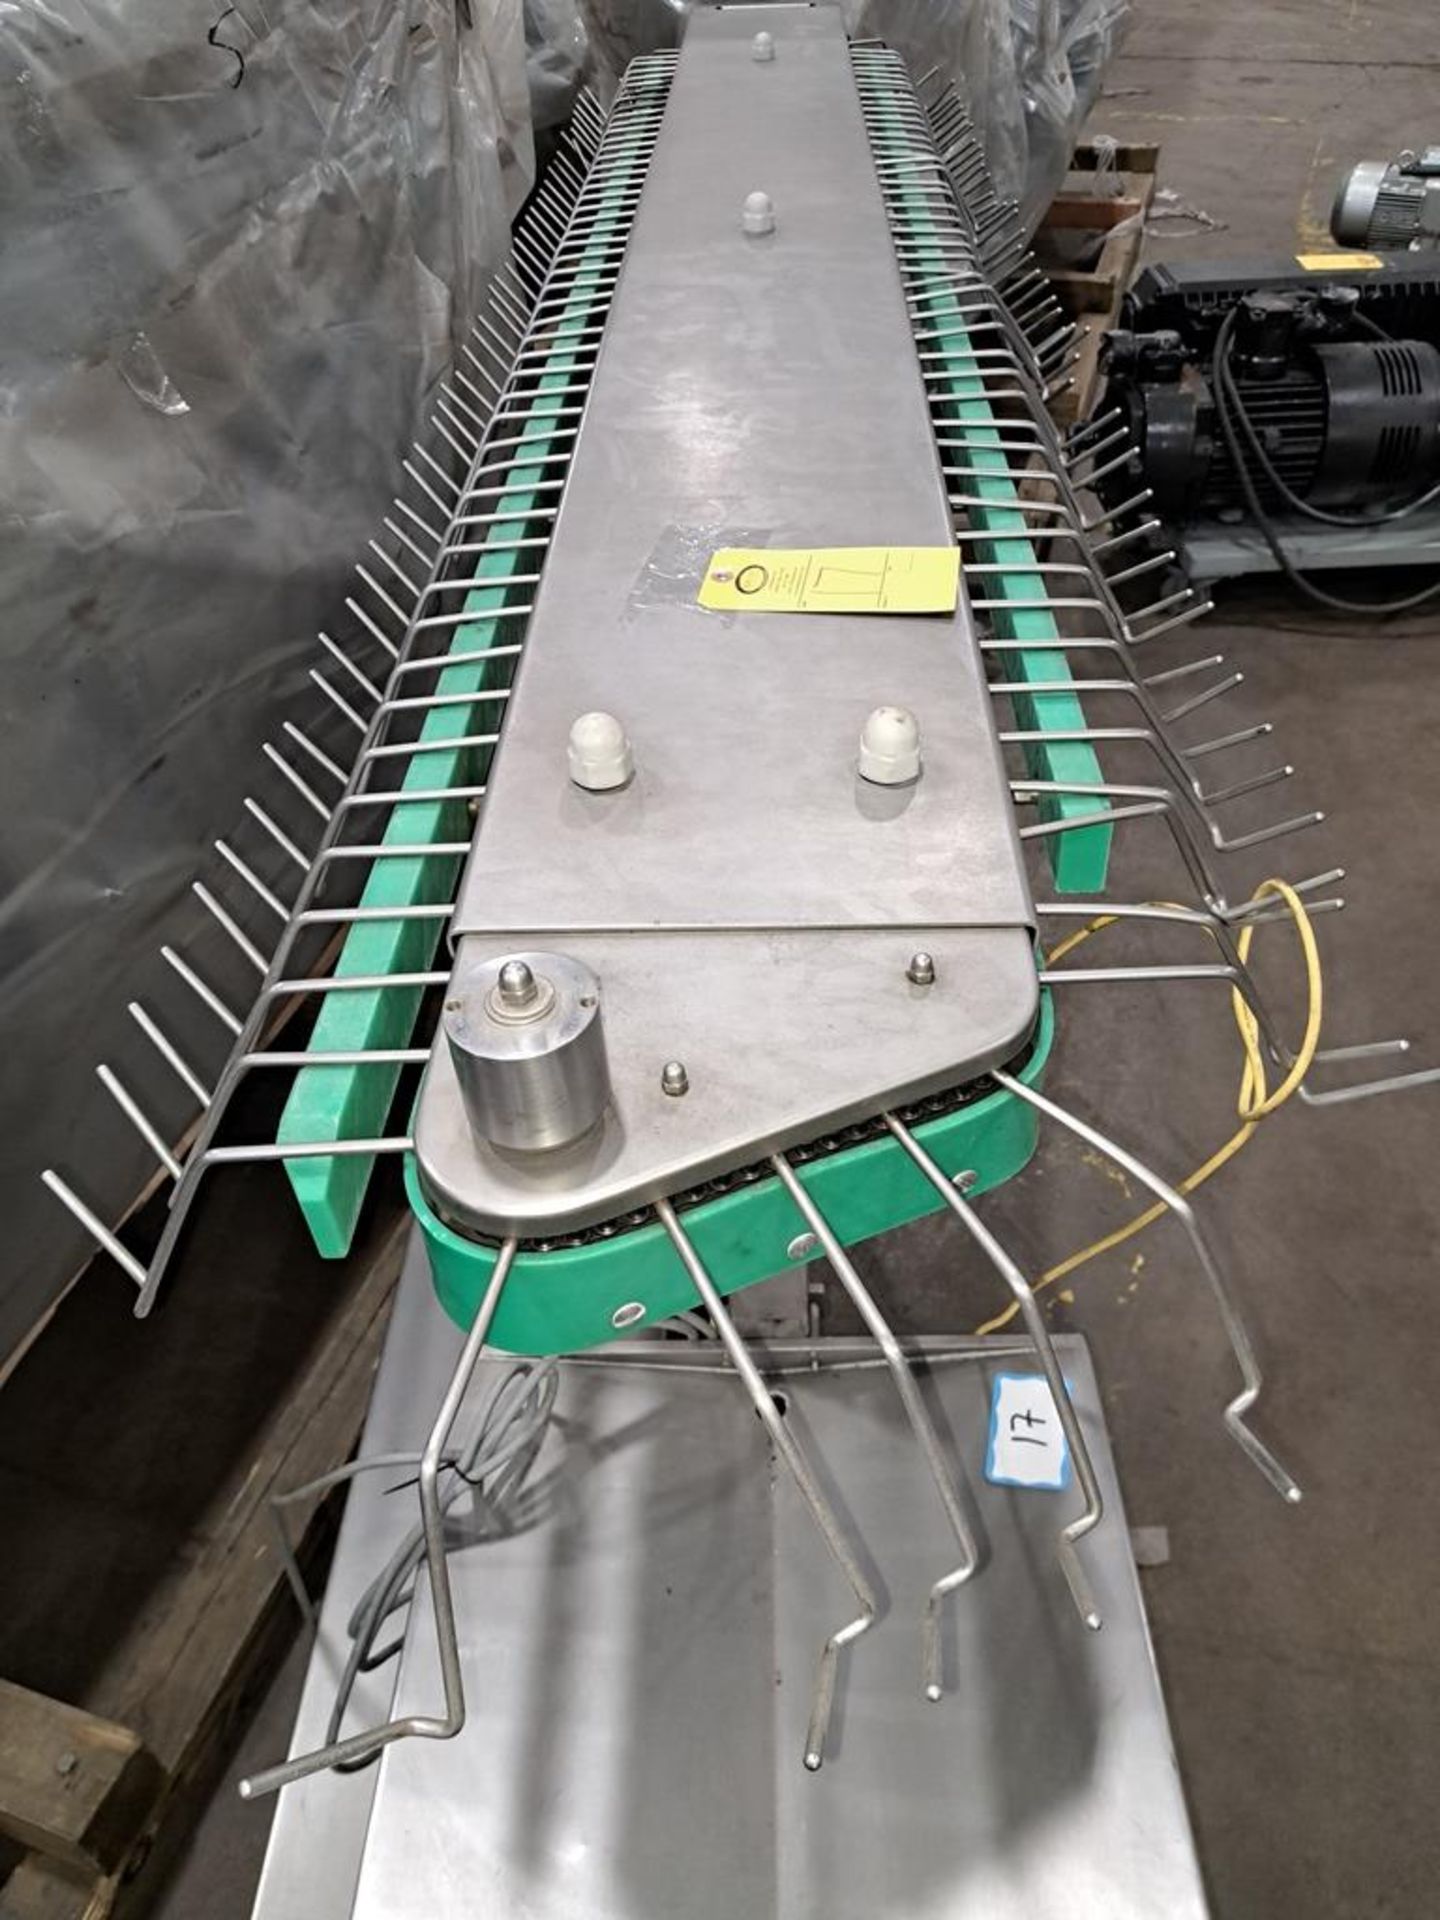 Vemag Mdl. AHM204 Sausage Link Hanger, 220-460 volts, 3 phase, Ser. #2040041 (Located in Plano, IL) - Image 3 of 5